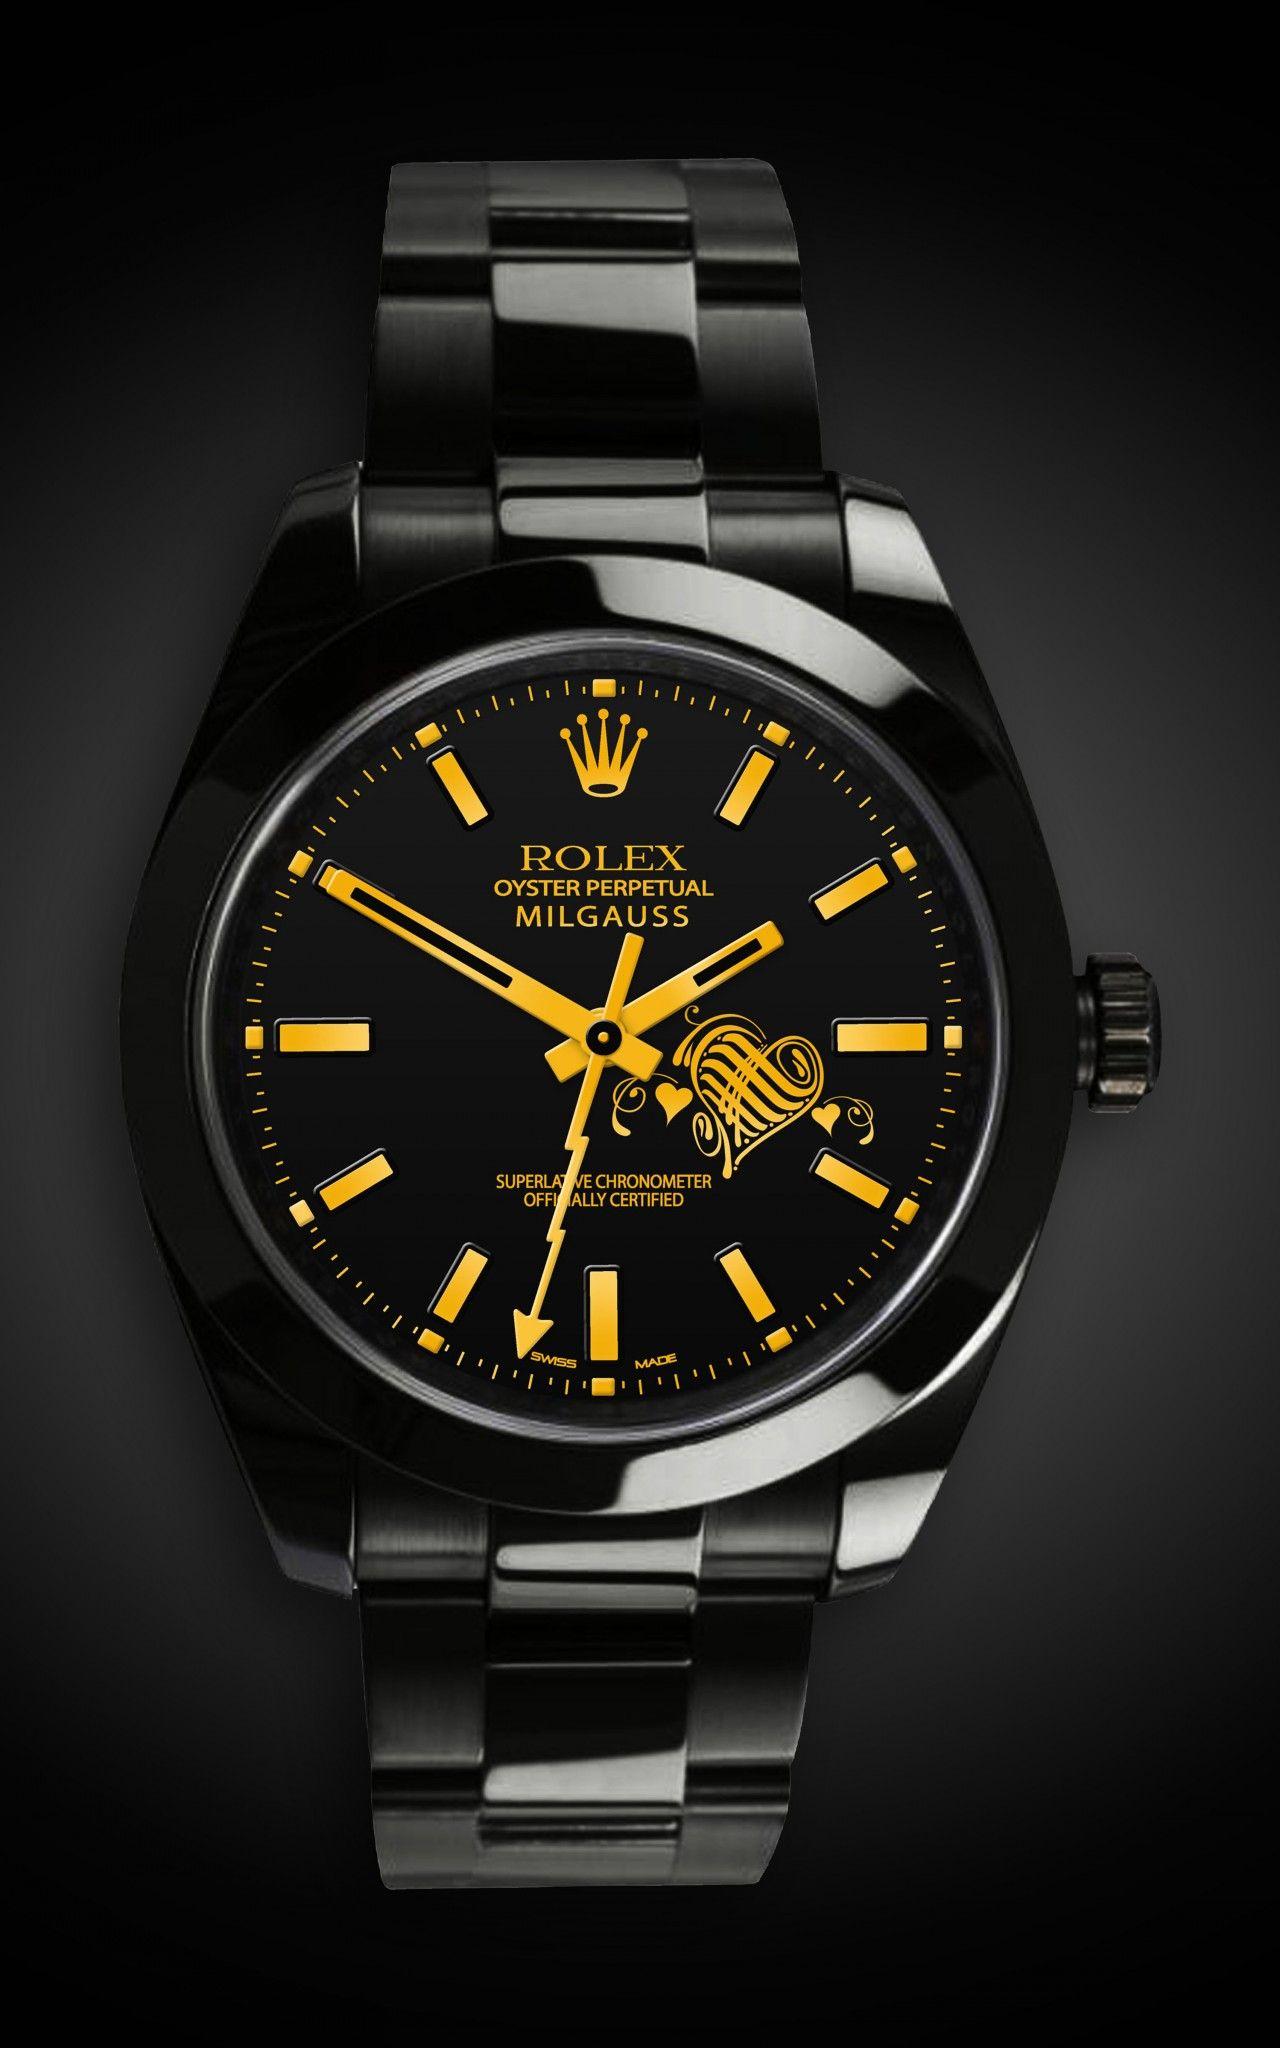 High Quality Rolex Wallpaper. Full HD Picture